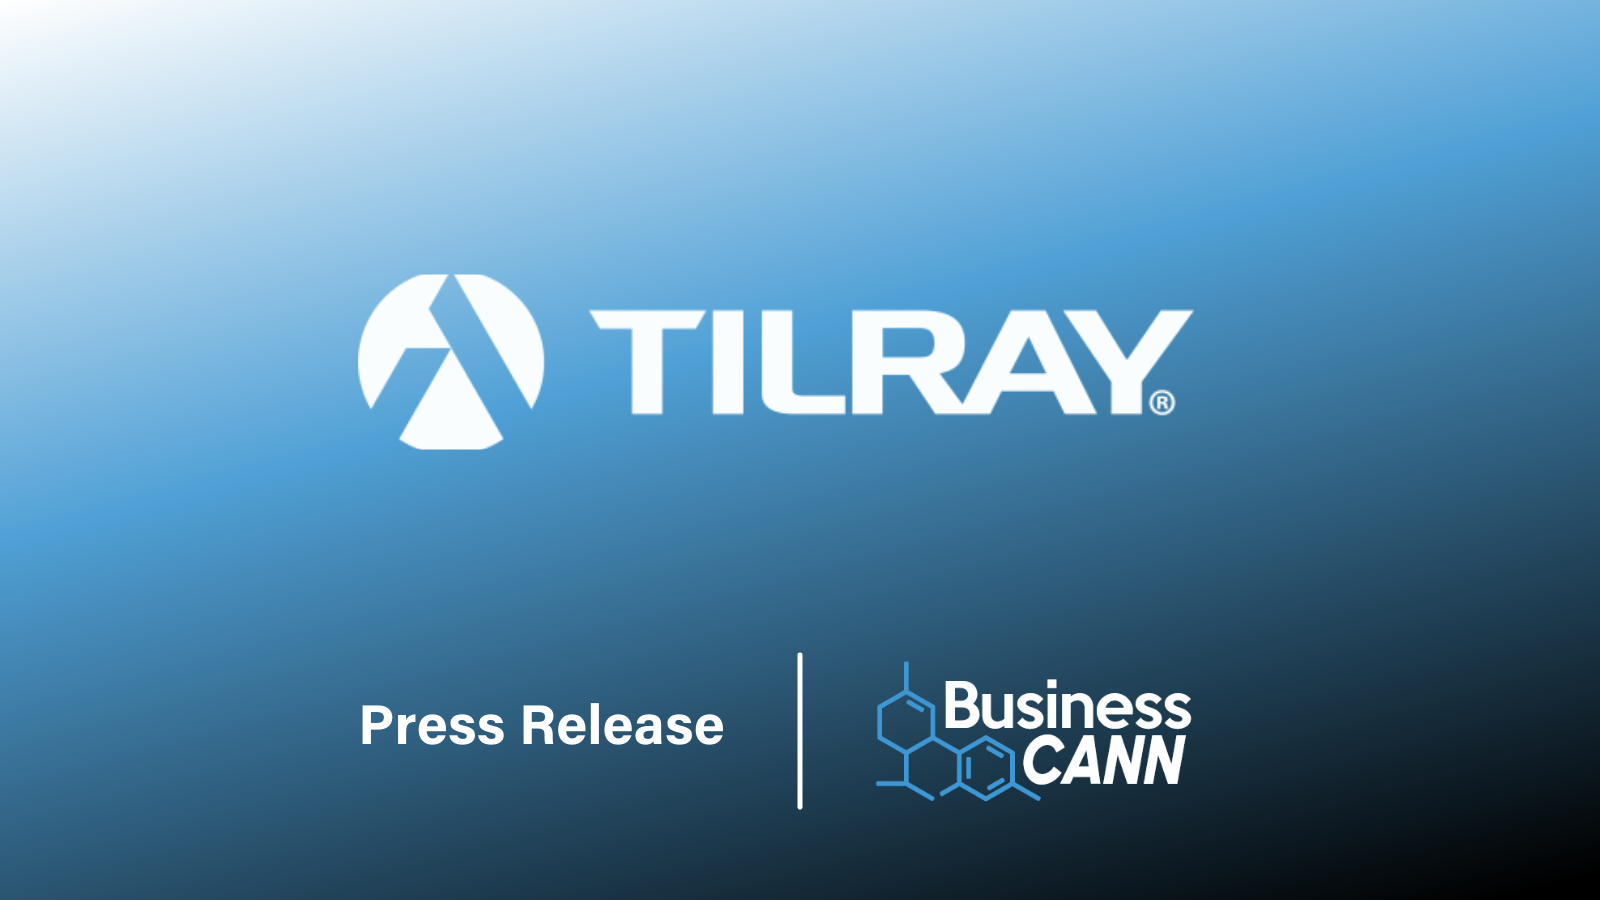 TILRAY Brands today announced that it has successfully relaunched its EU GMP-produced medical cannabis oral solution in Ireland under the country’s Medical Cannabis Access Program (MCAP).